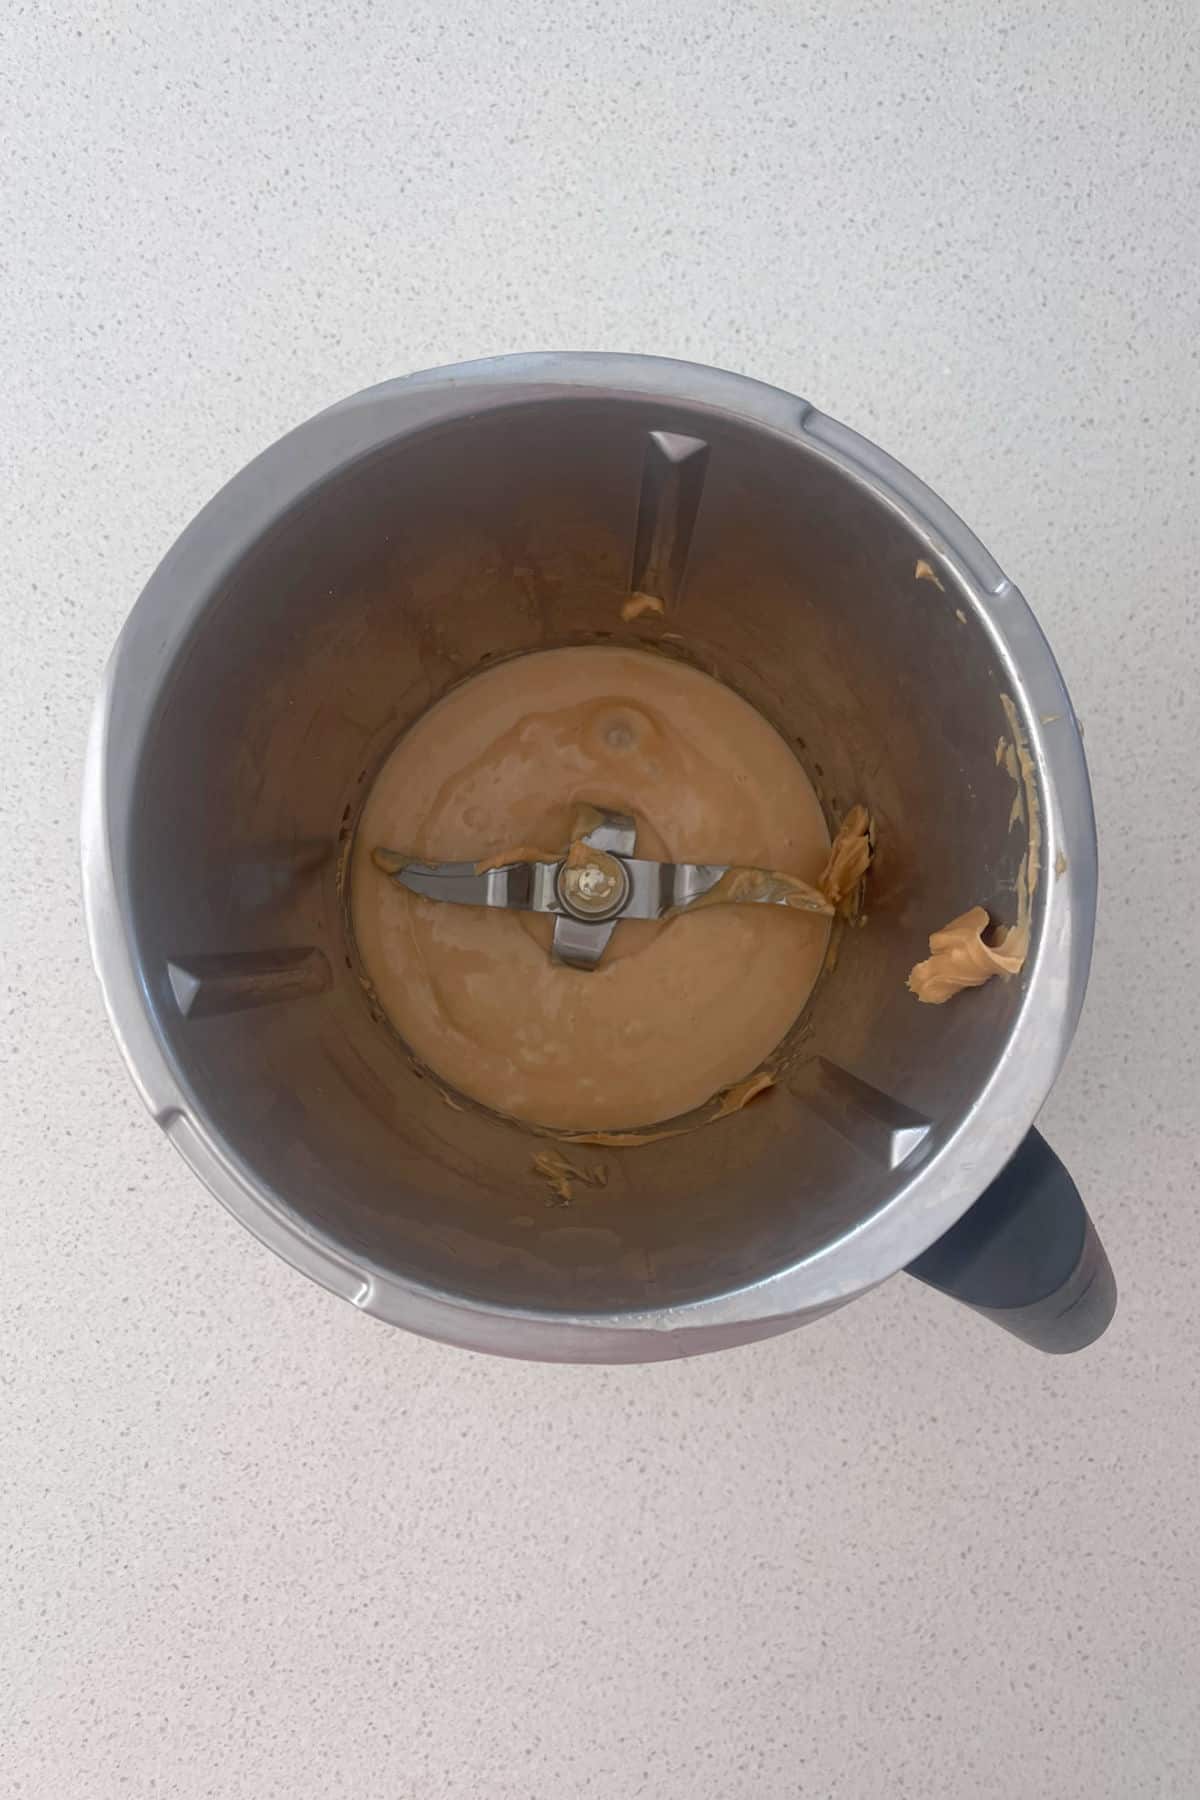 Melted peanut butter and honey in a thermomix bowl.